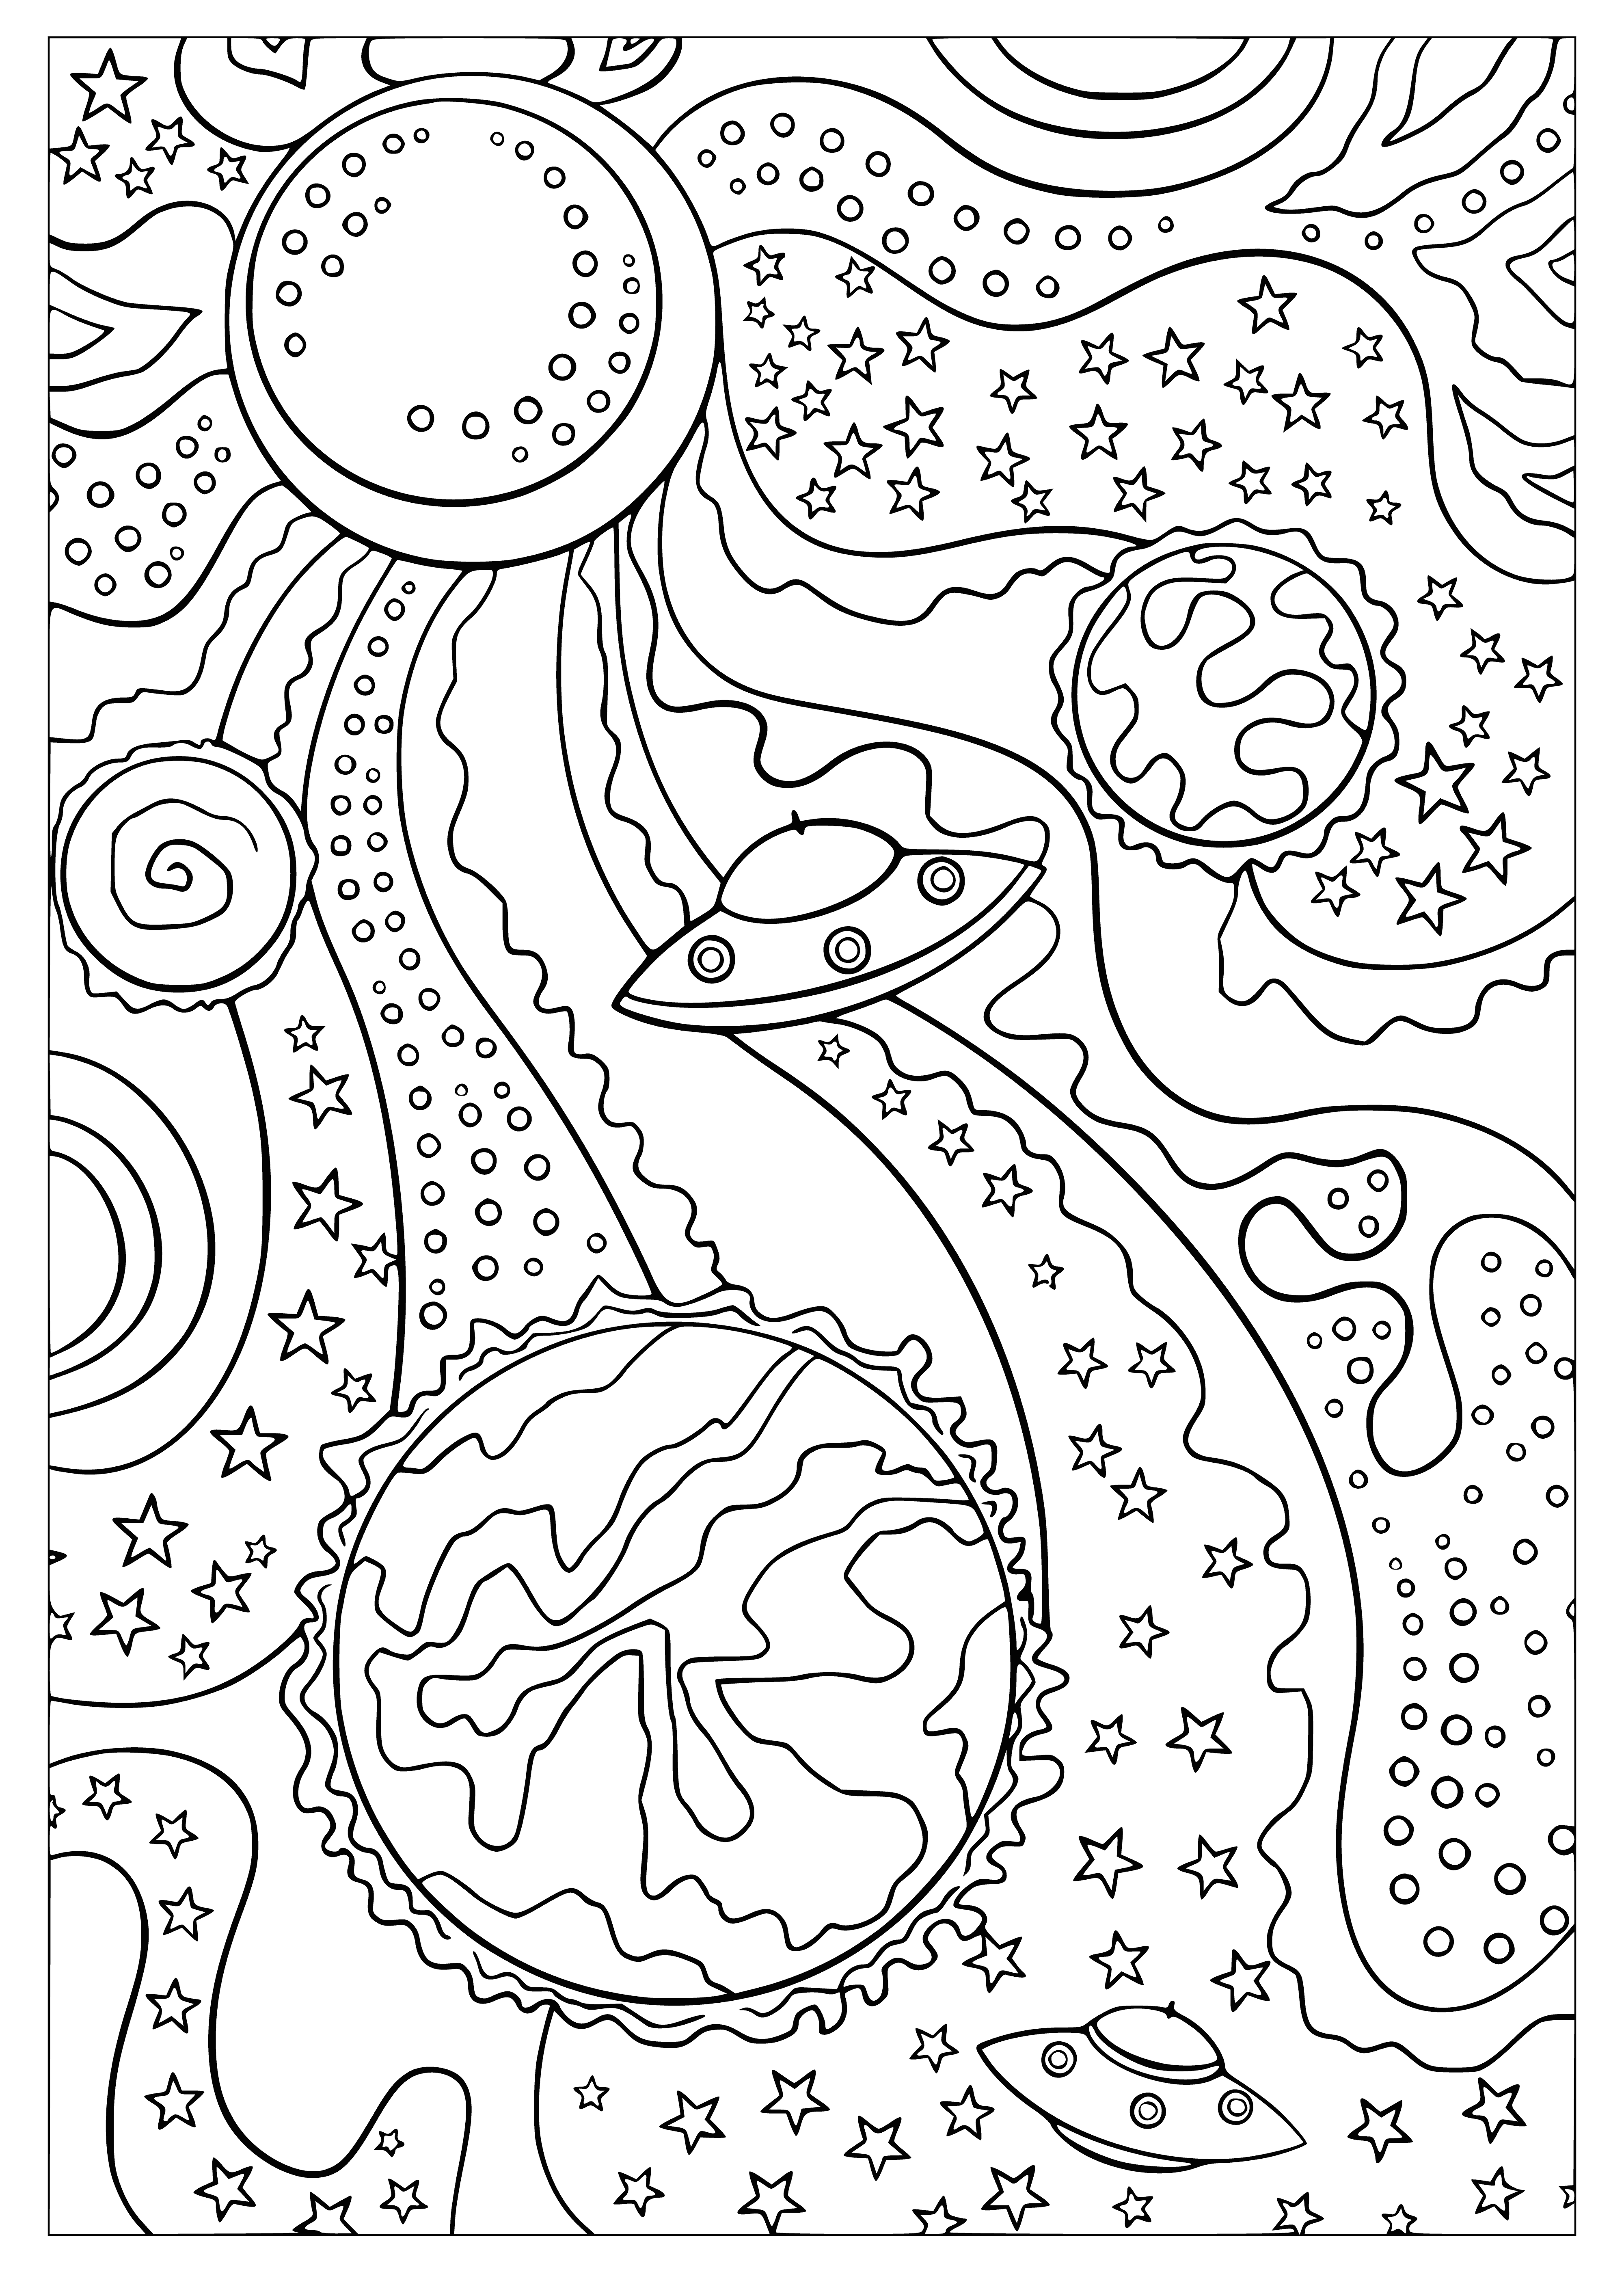 coloring page: The stars in the night sky form a delicate web of light across the vast emptiness. #Stargazing